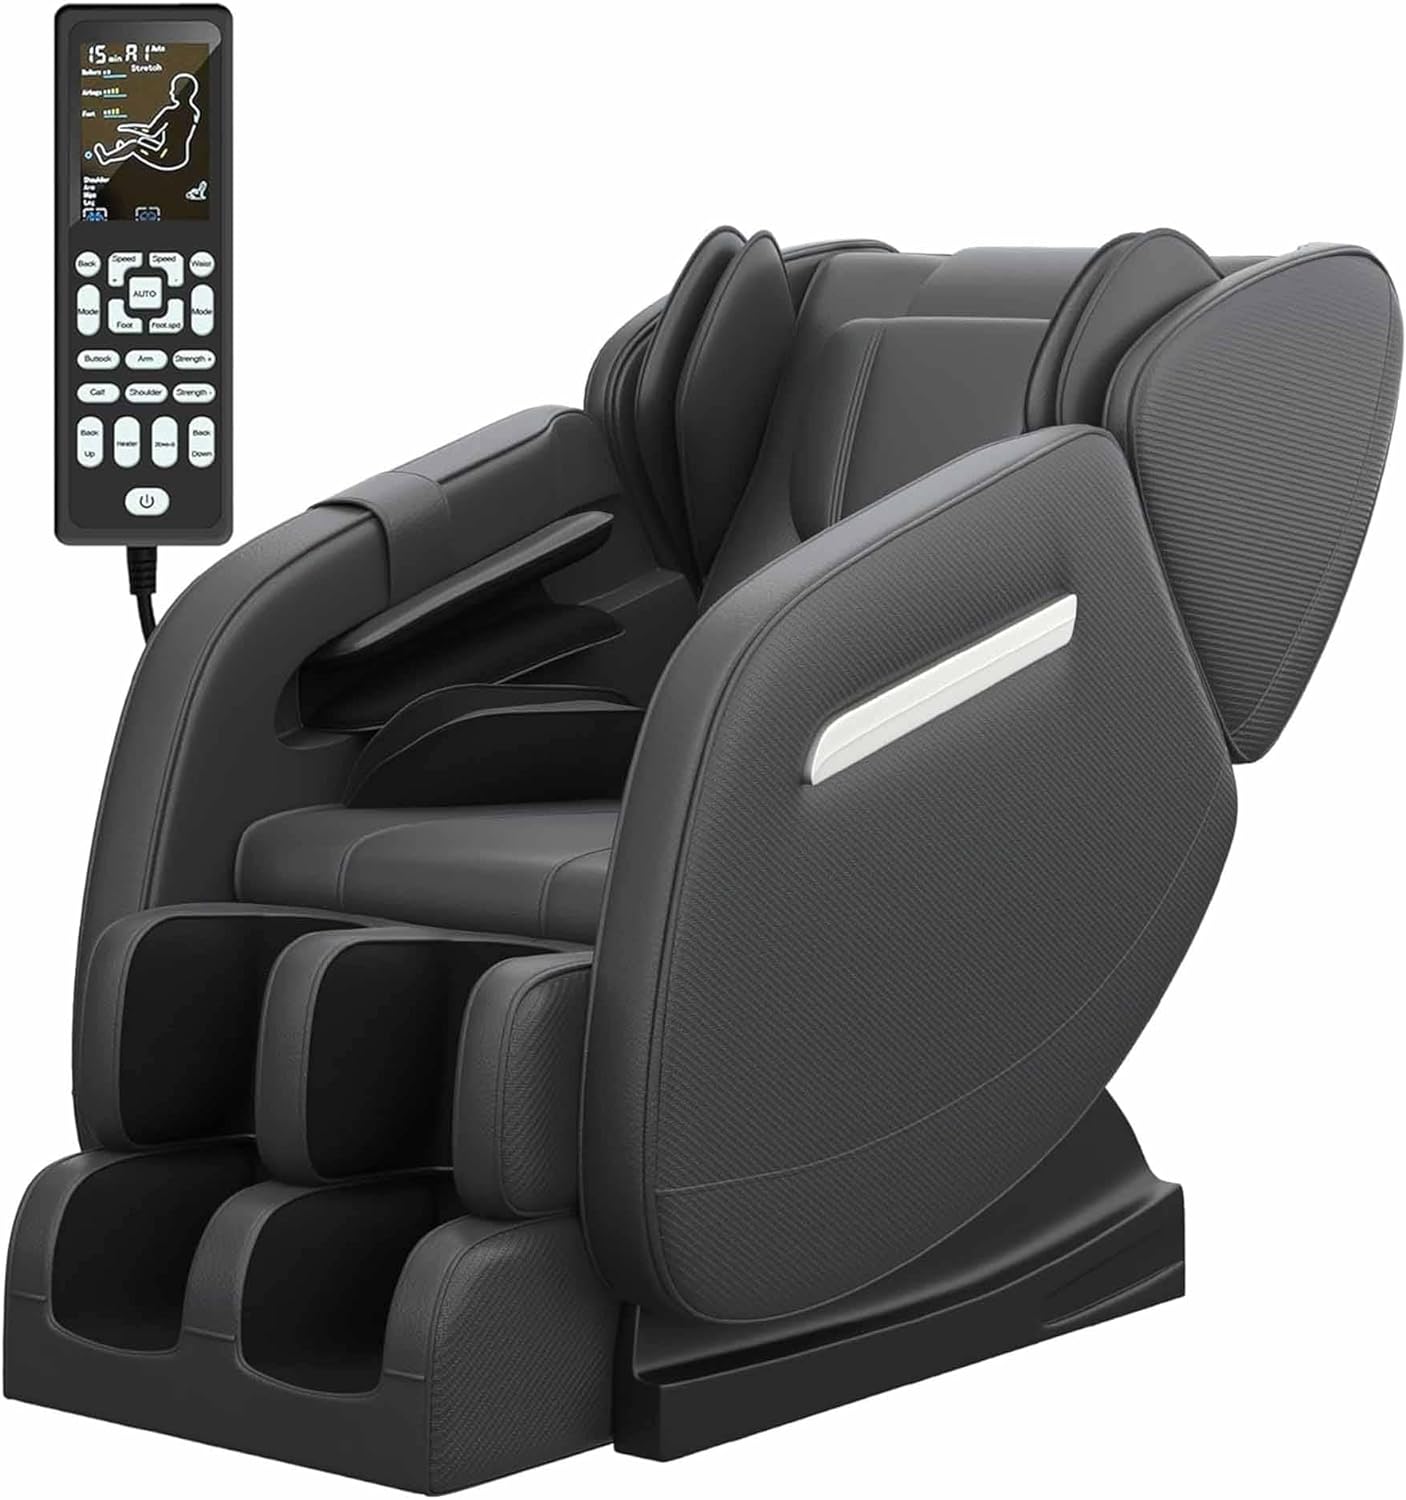 Massage Chair - Bed Bath & Beyond Realrelax Favor-MM350 Heated Full Body Massage Chair with Zero Gravity Mode and Bluetooth Music Player Black